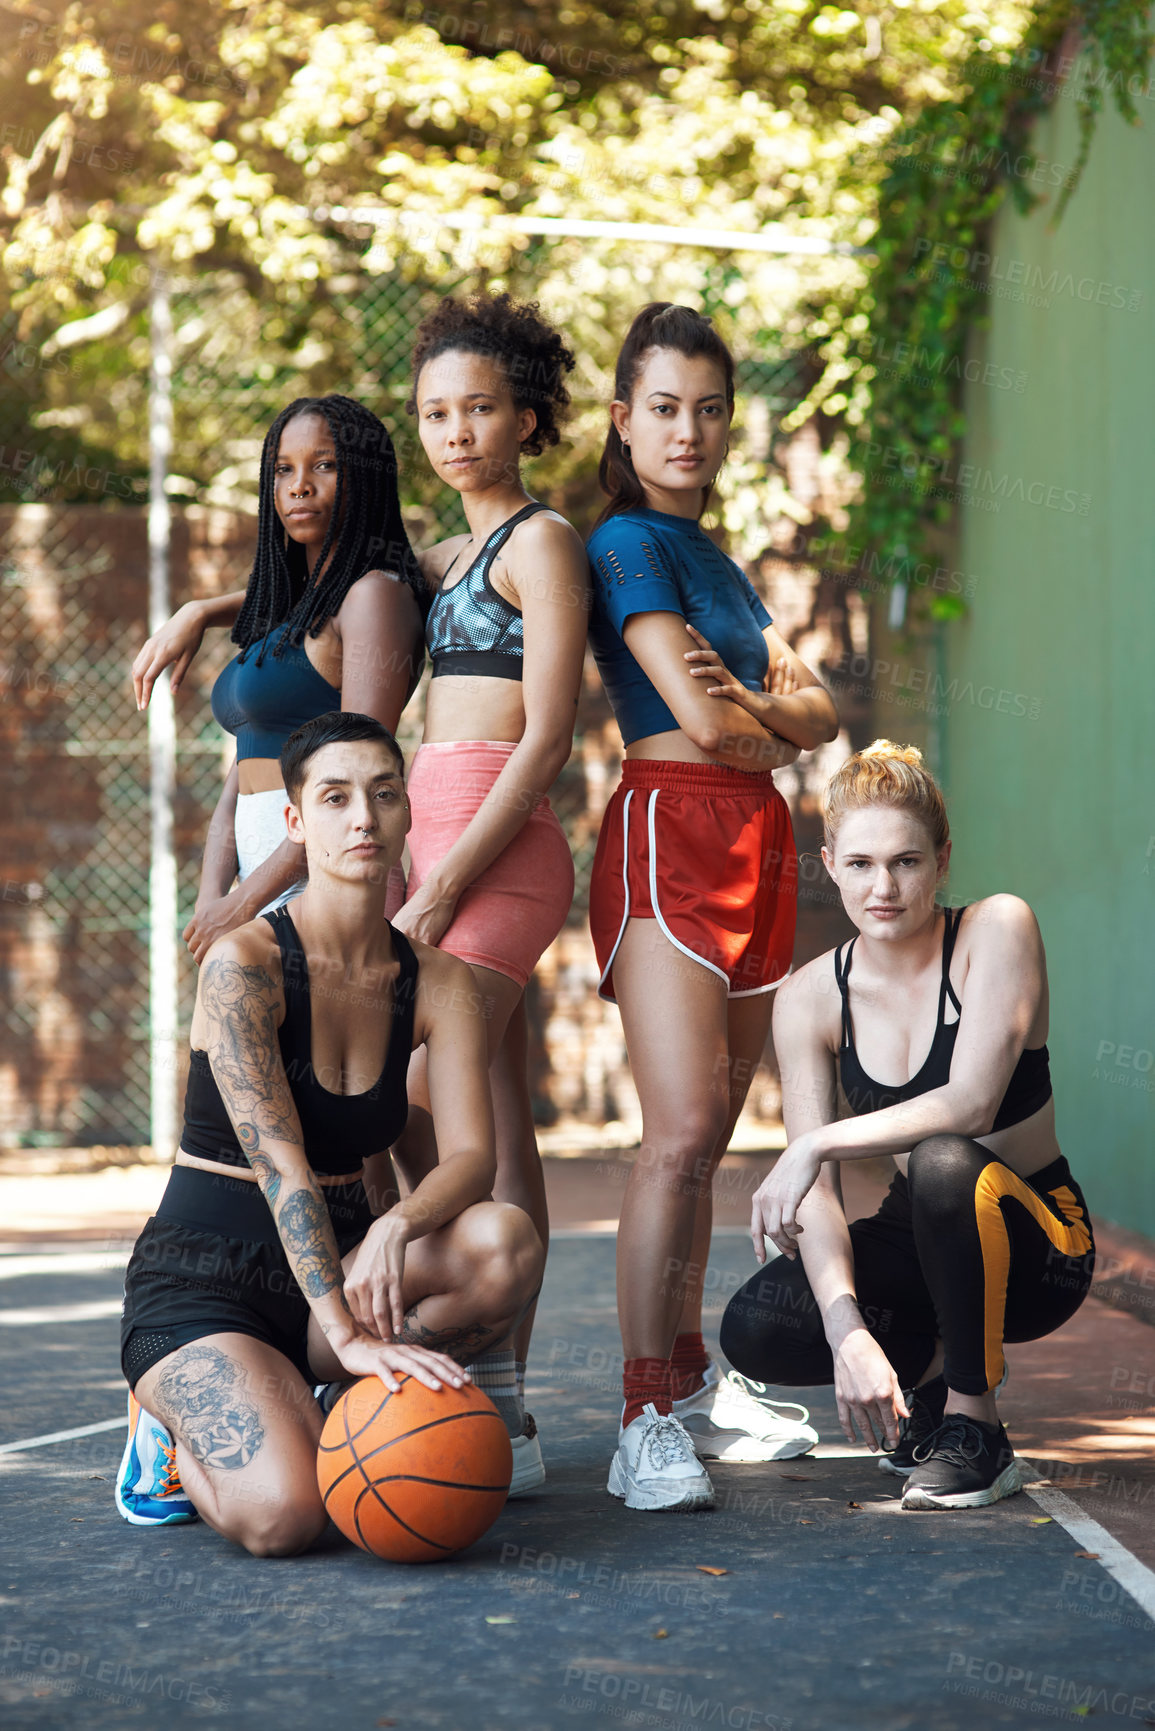 Buy stock photo Full length portrait of a group of attractive young female athletes posing together on the basketball court